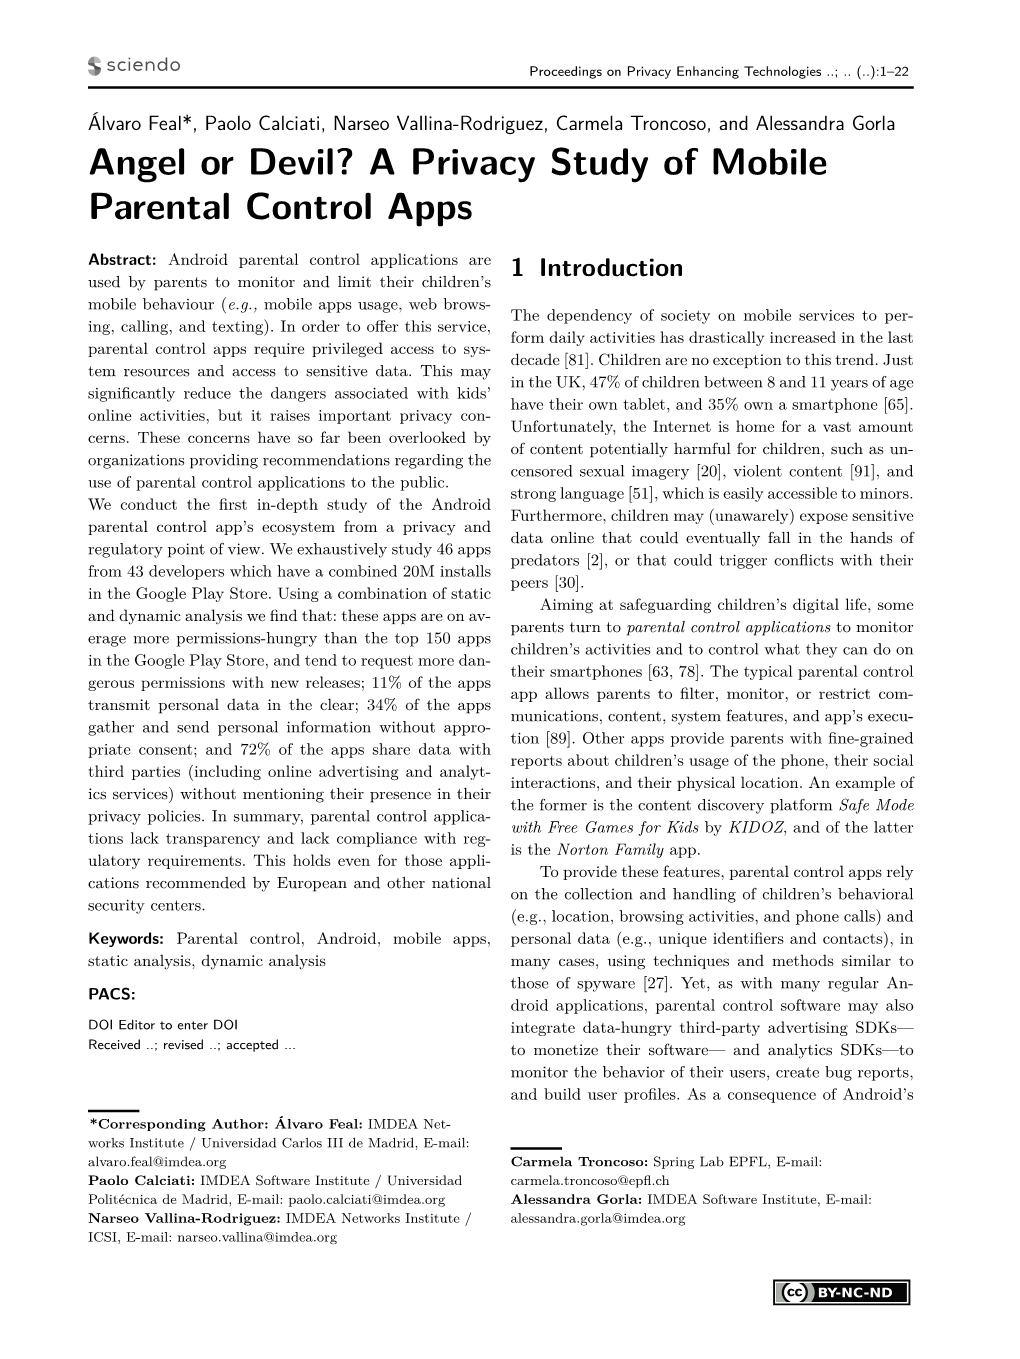 Angel Or Devil? a Privacy Study of Mobile Parental Control Apps